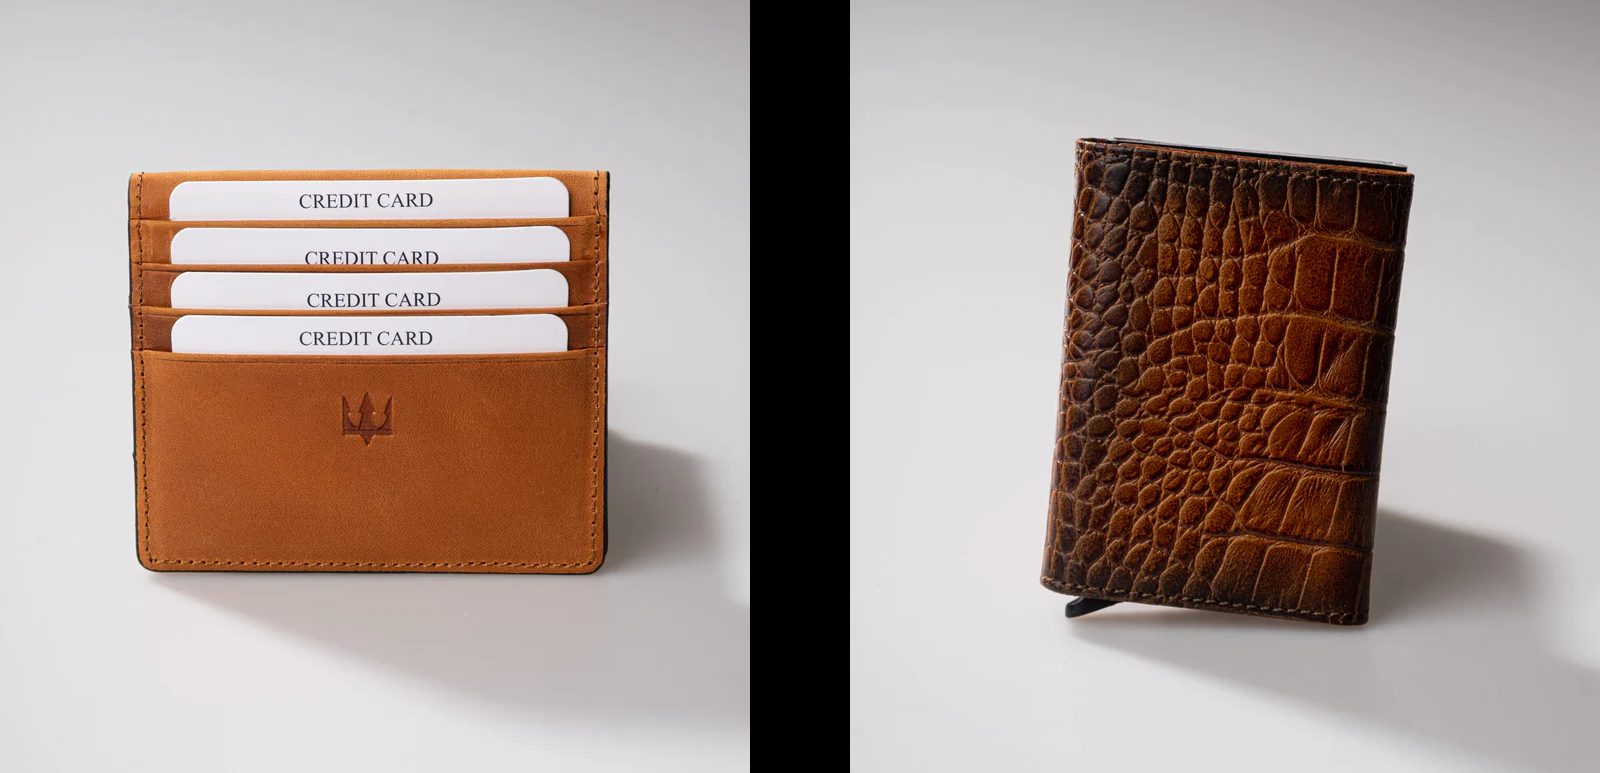 Card Holders or Mechanism Wallets: Which One Should You Choose?